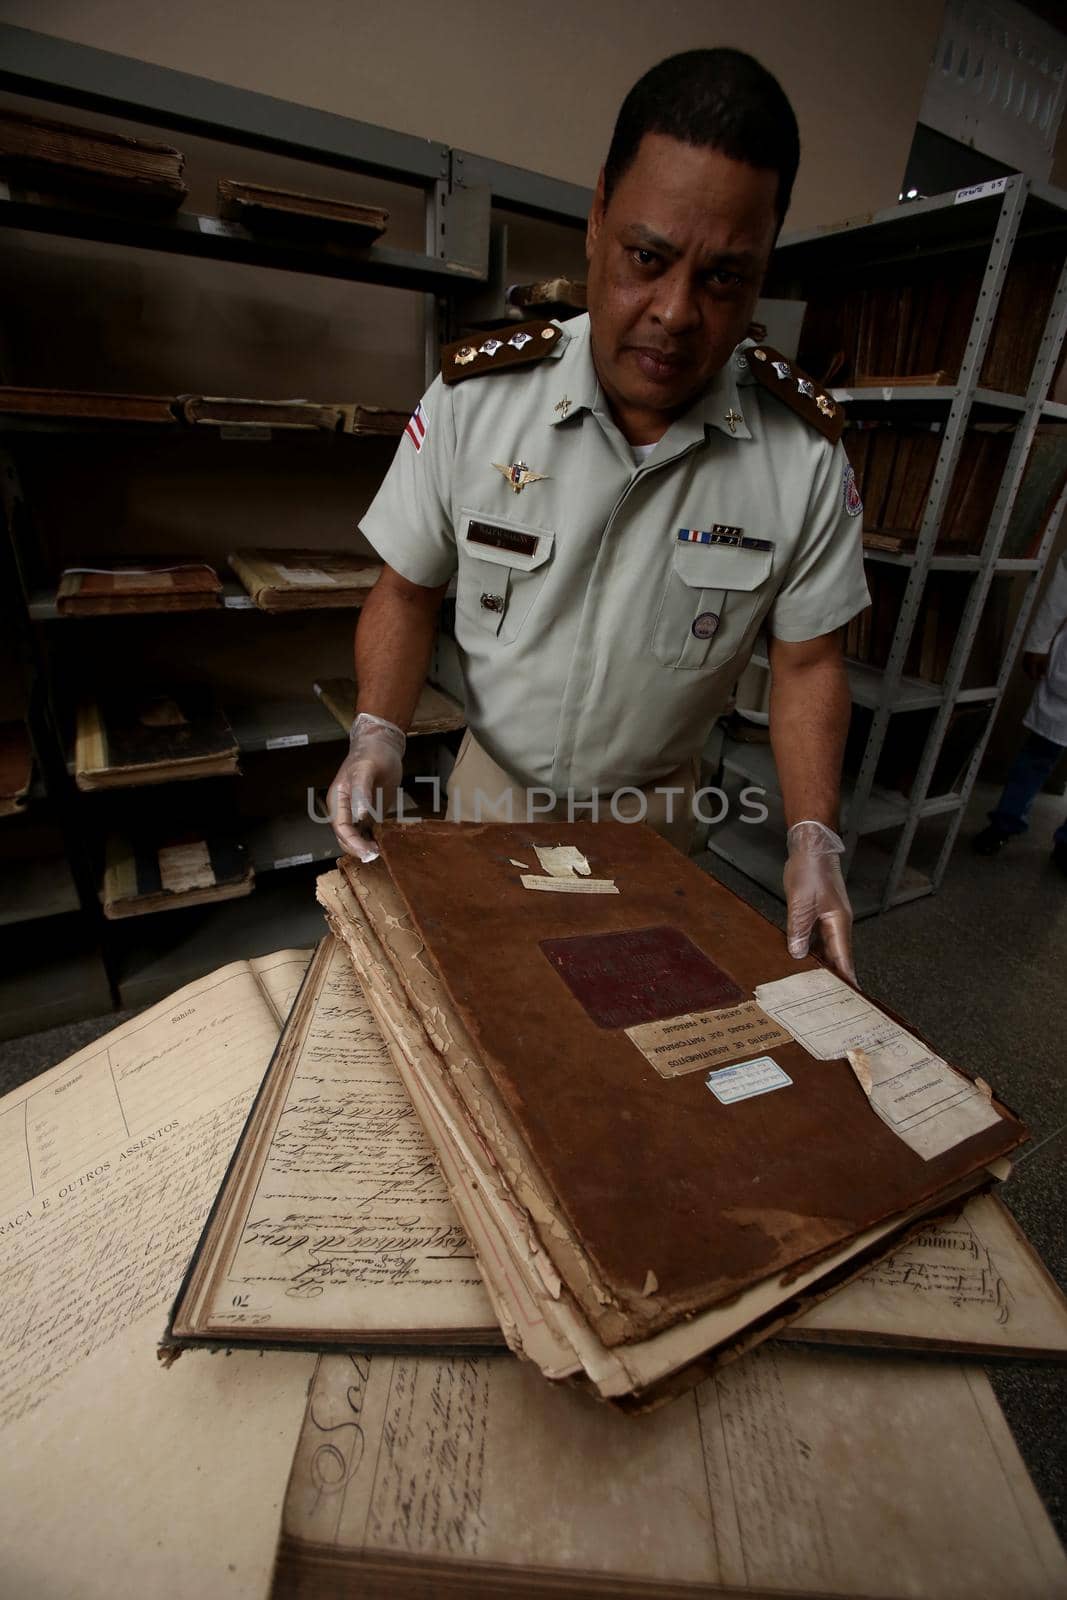 salvador, bahia, brazil - october 18, 2017: Collection of old books from the Military Police of Bahia is seen in the city of Salvador.